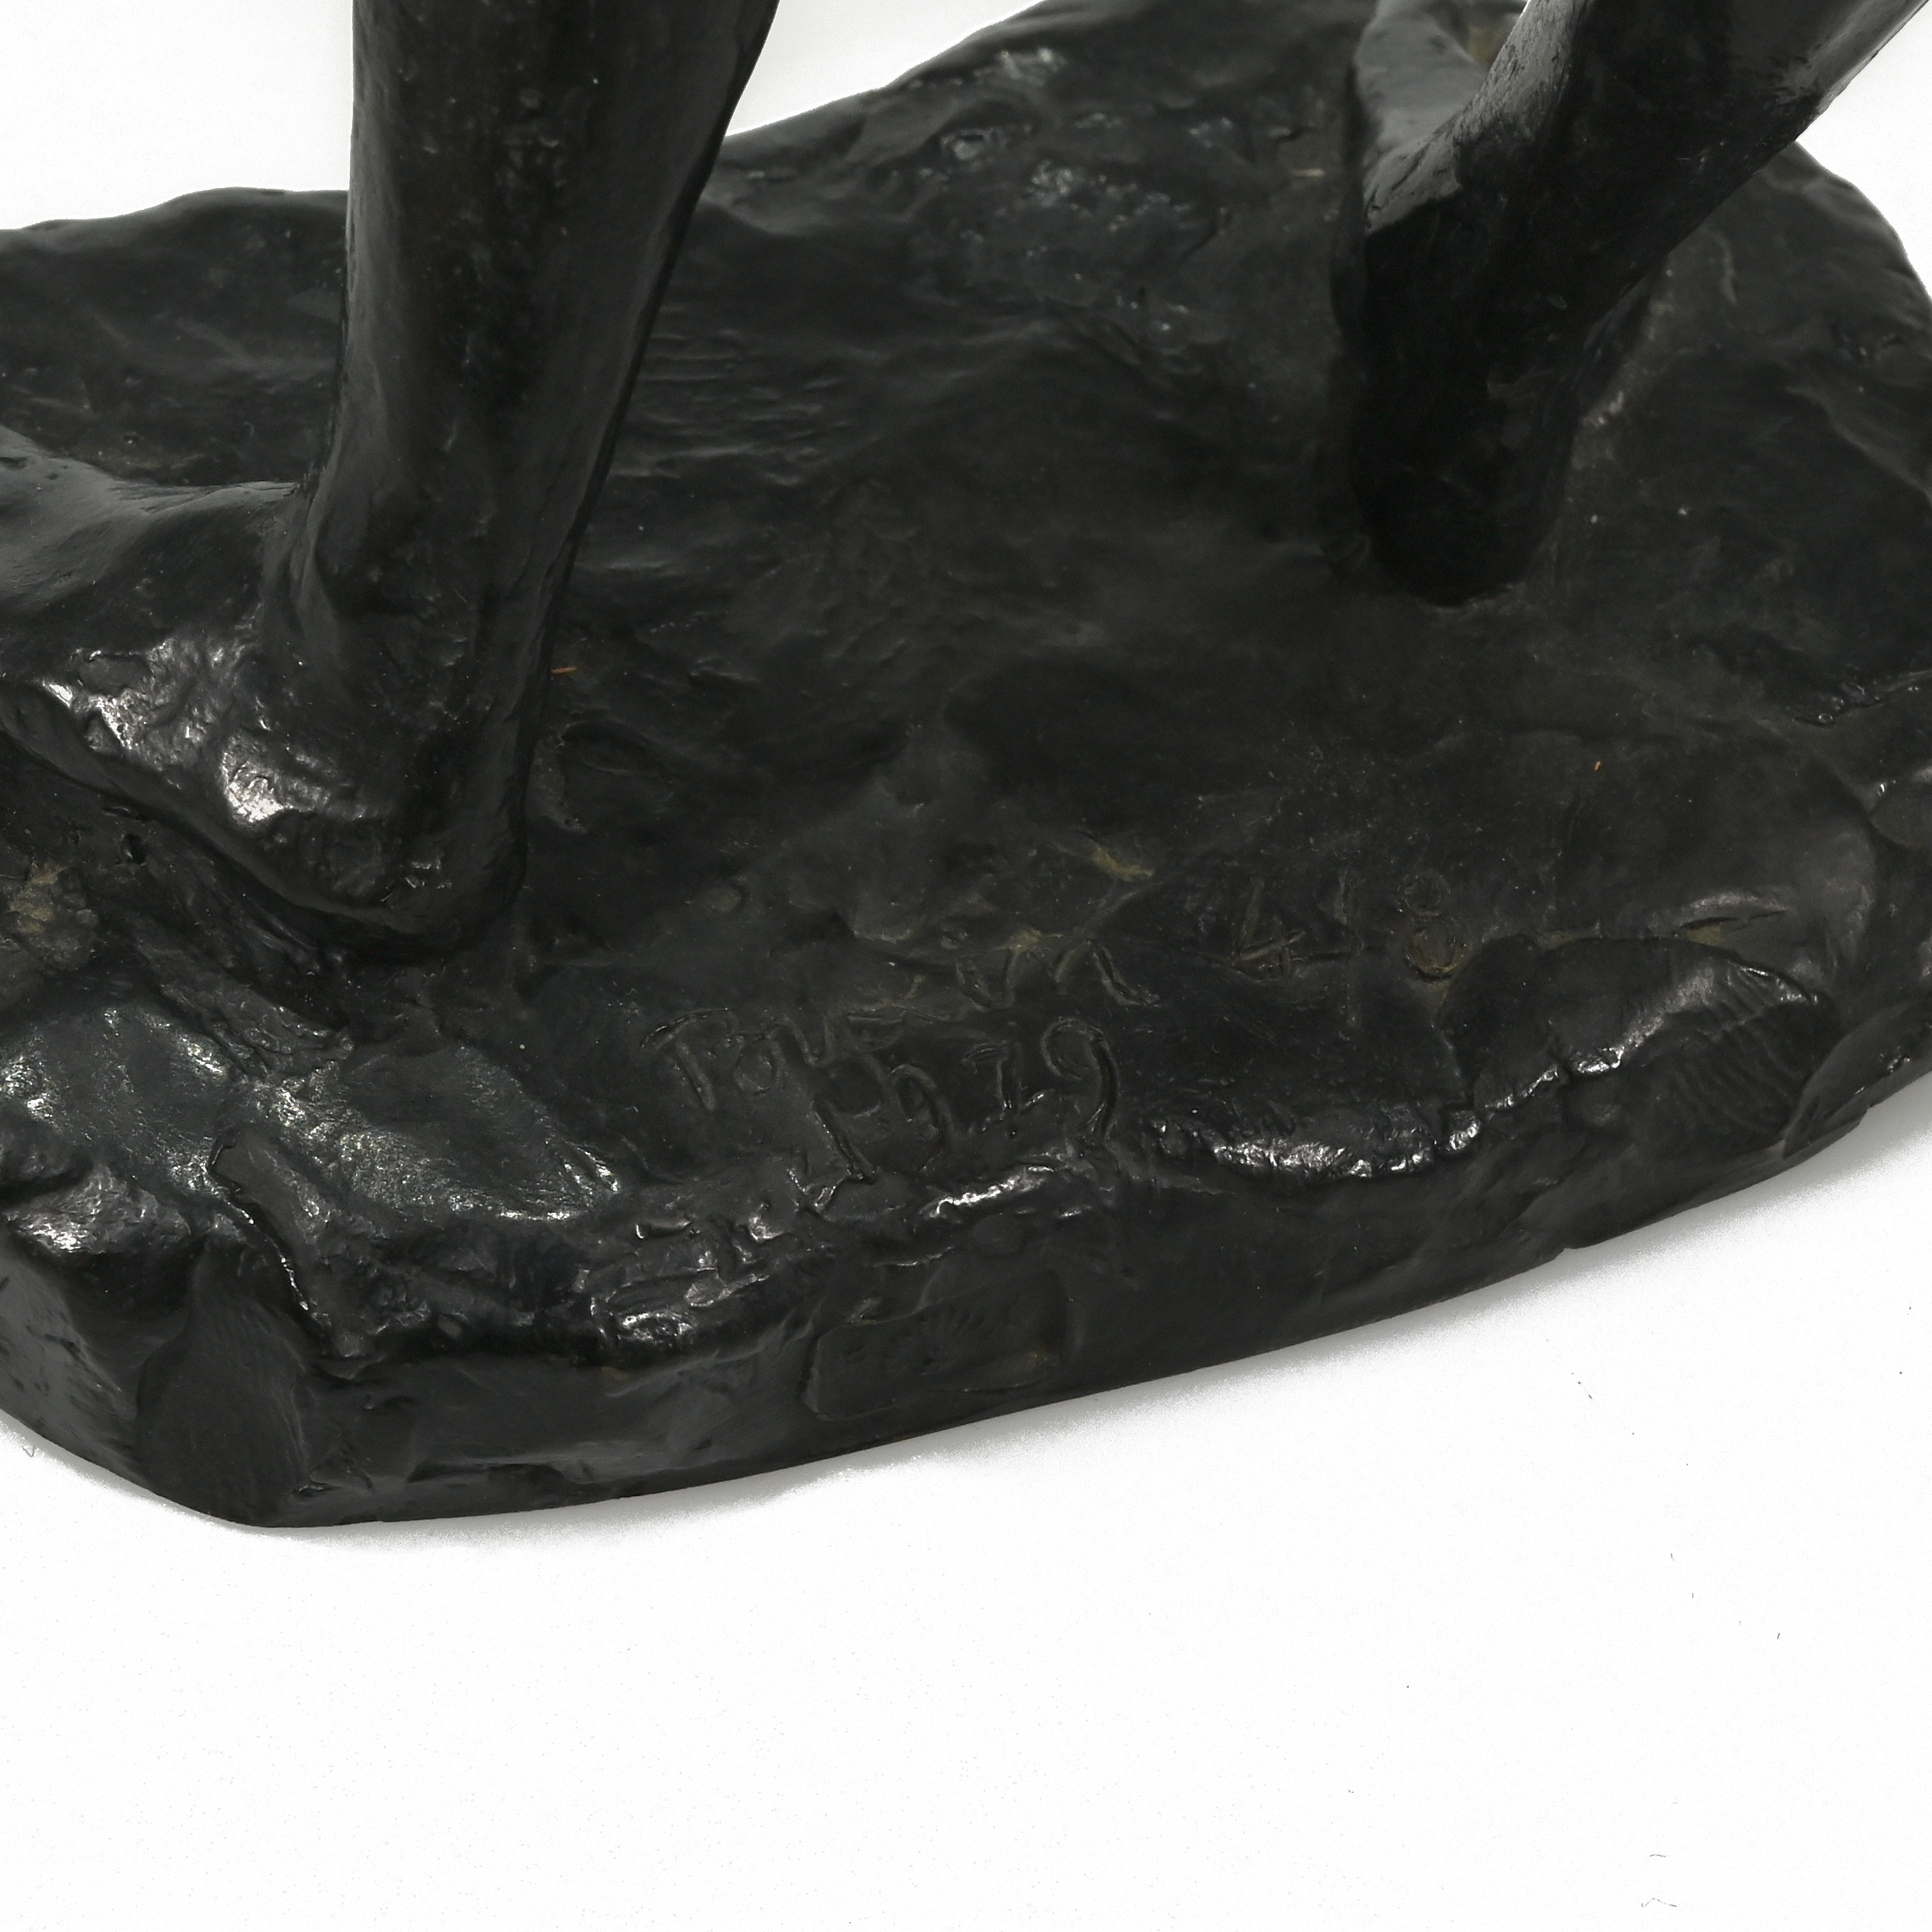 Stephan Buxin (1909-1996) - Woman (Lucile) drying herself after the Bath - Bronze, 1979, signed a... - Image 3 of 3